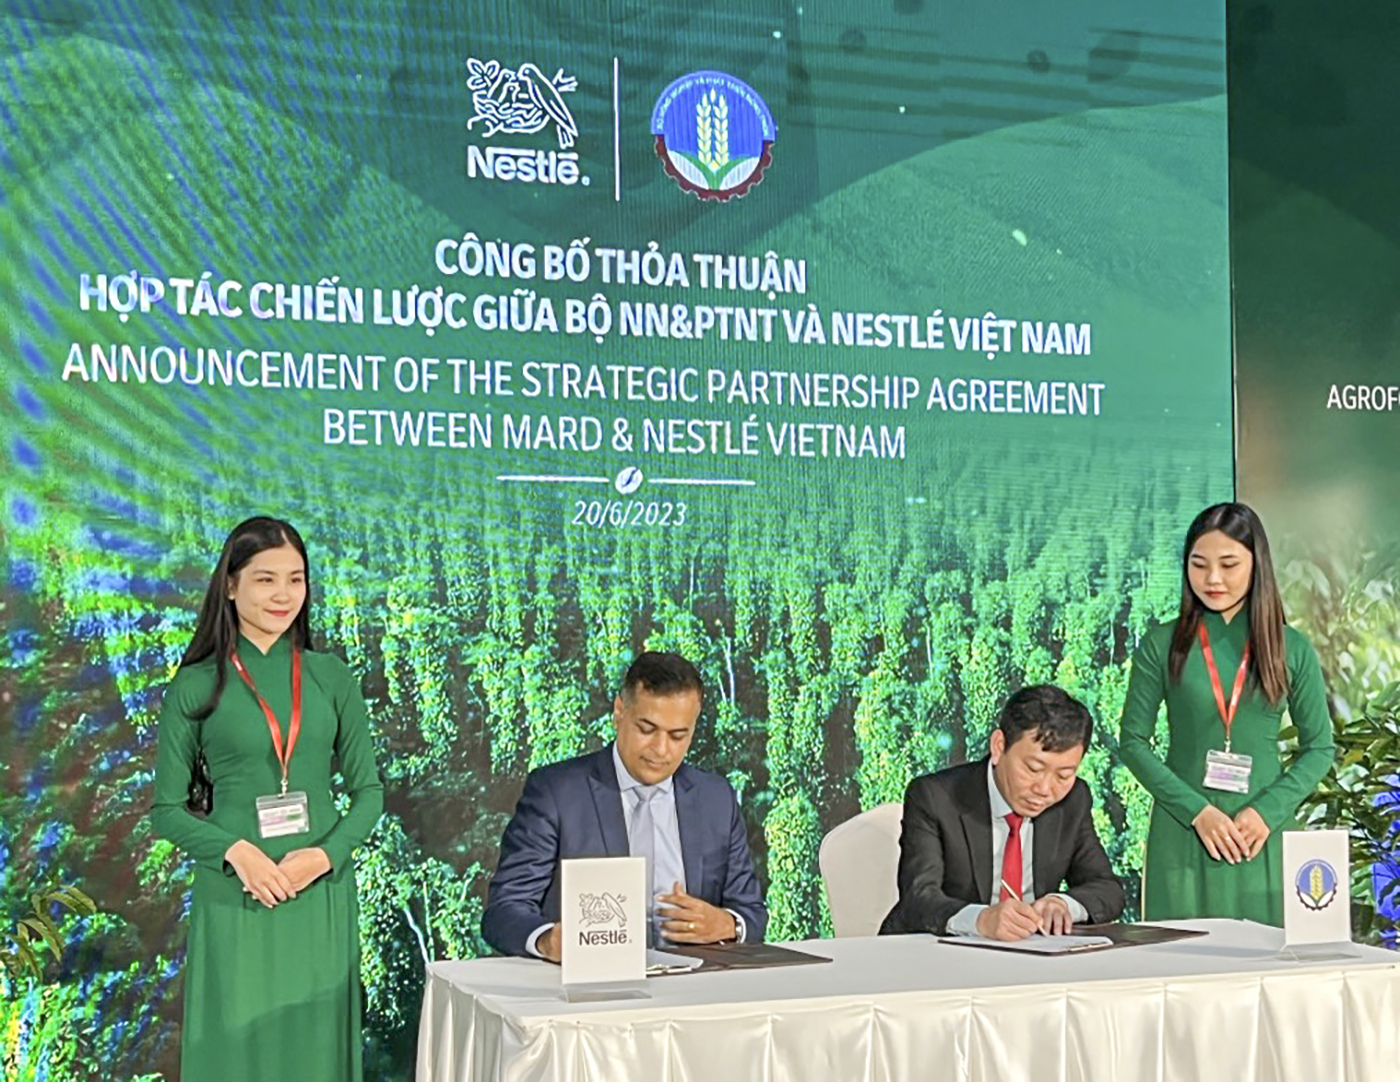 Mr. Nguyen Do Anh Tuan, Director General of the International Cooperation Department - MARD (right) and Mr. Binu Jacob, General Director of Nestlé Vietnam (left) signed a Memorandum of Cooperation between Nestlé Vietnam and the Ministry of Agriculture and Rural Development.